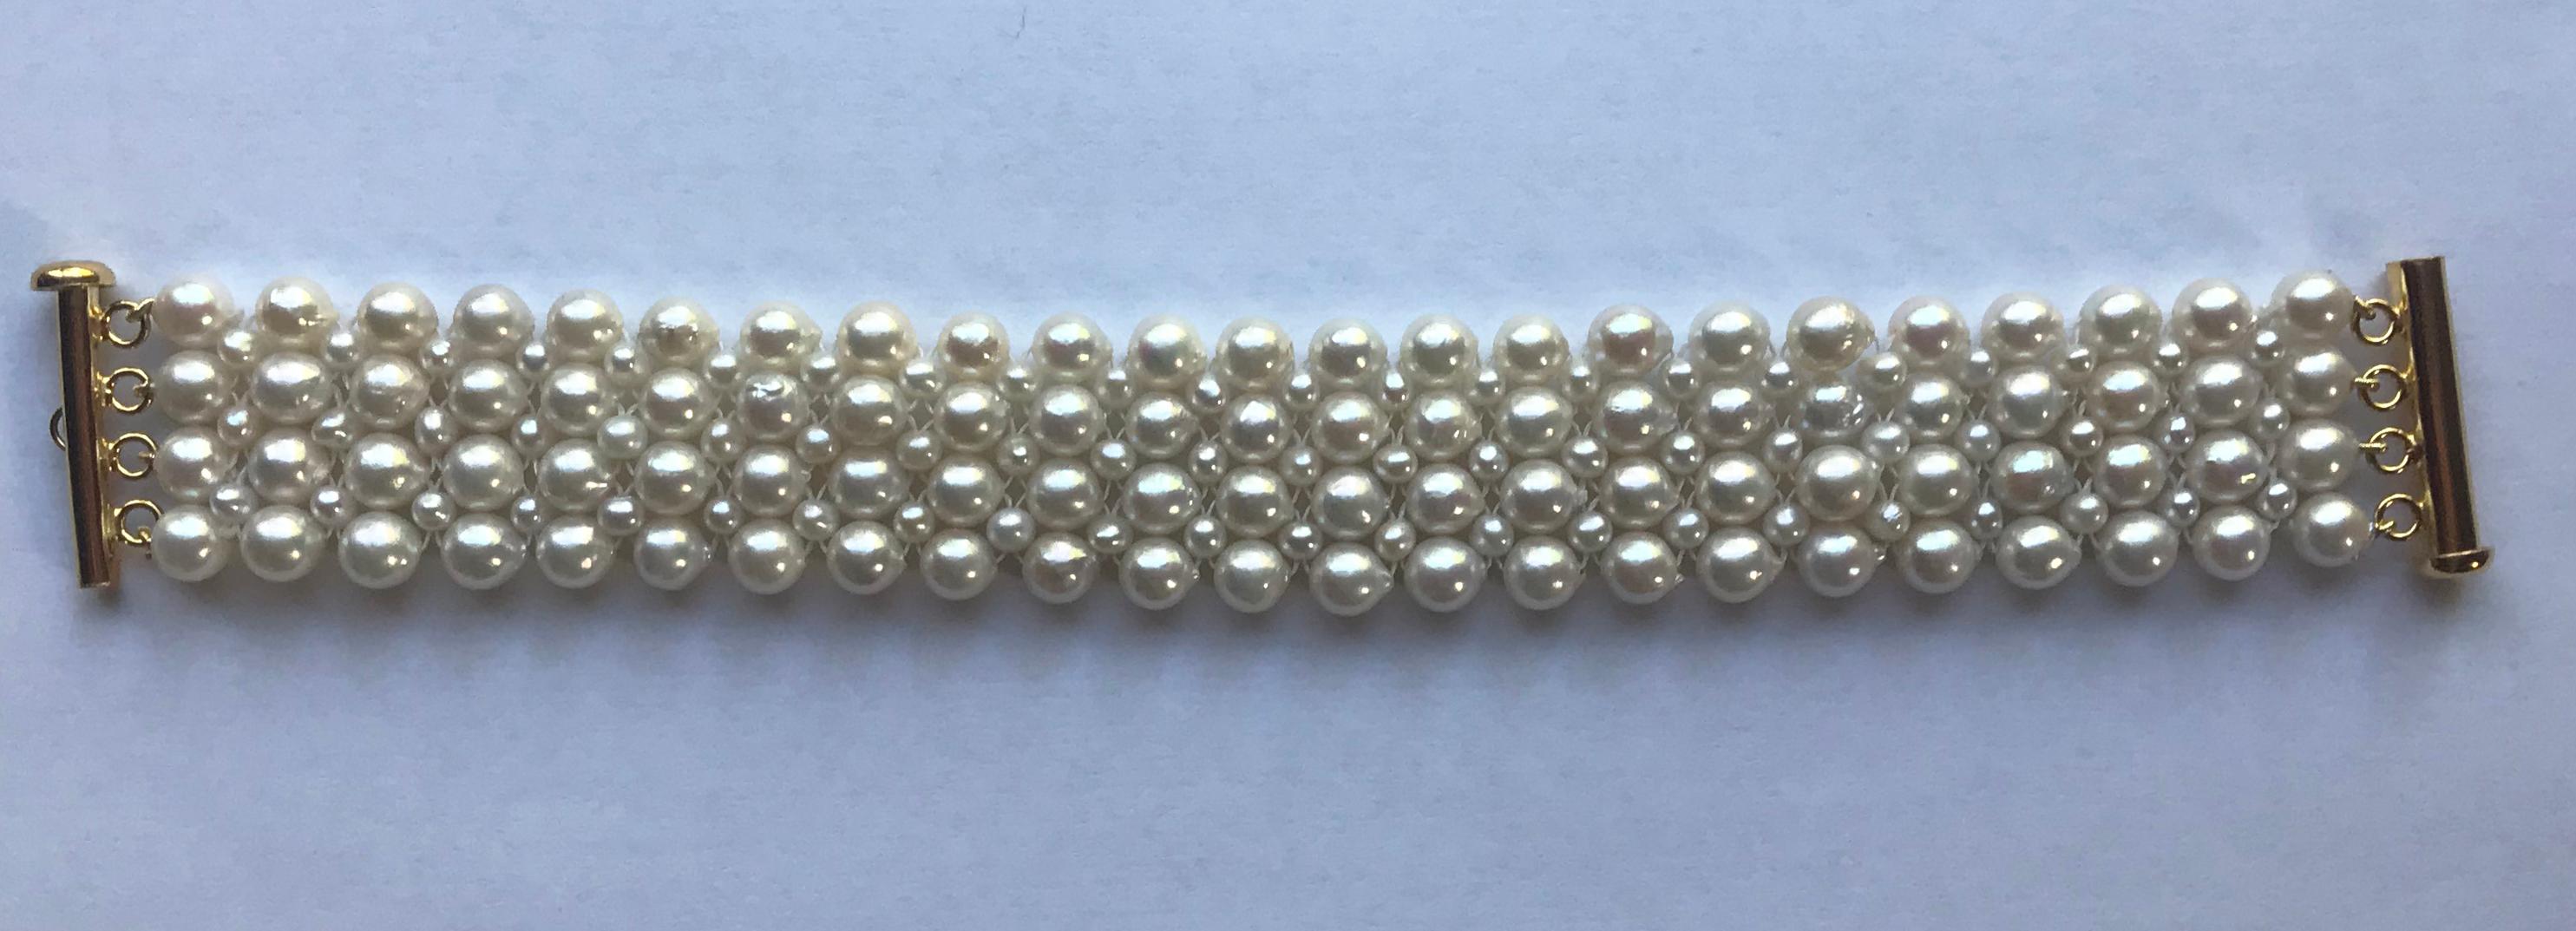 Marina J. Woven Pearl Bracelet with 14 Karat Yellow Gold Plated Clasp 4